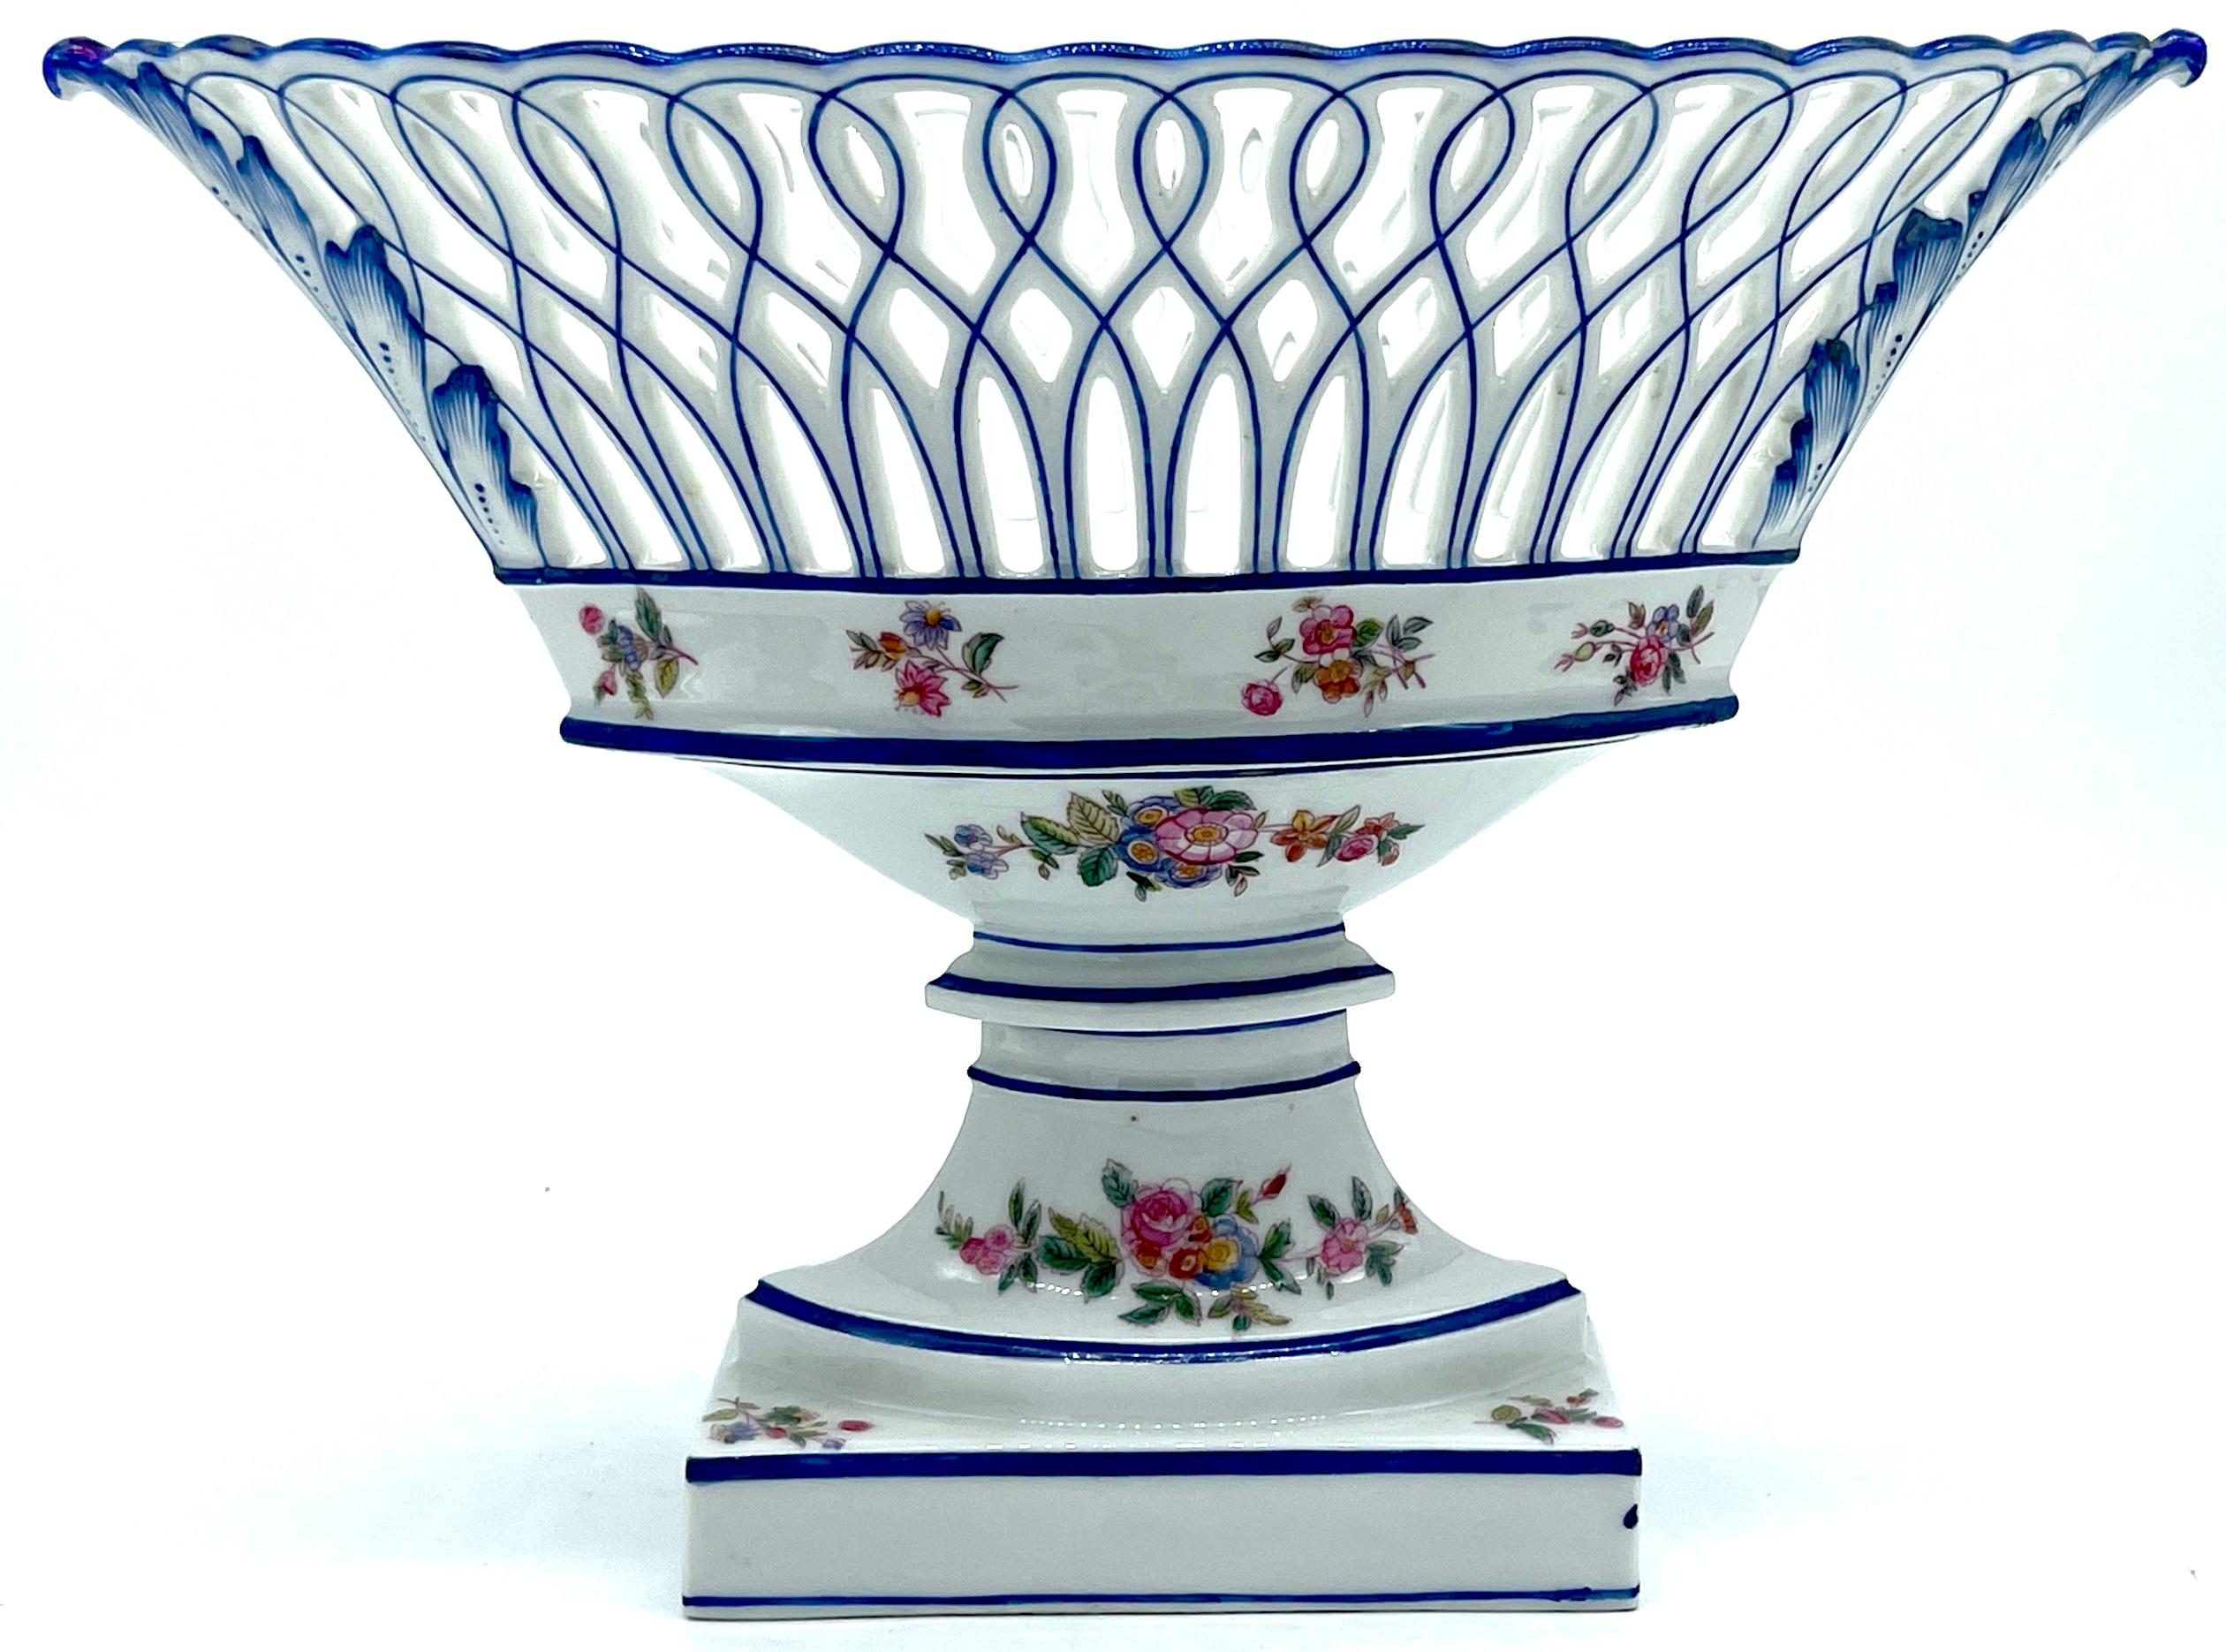 19th Century Old Paris Neoclassic Oval Blue and White Floral Pedestal Centerpiece 
France, circa 1875

A splendid 19th-century Old Paris Neoclassic Oval Blue and White Floral Pedestal Centerpiece from France, dating back to circa 1875. This